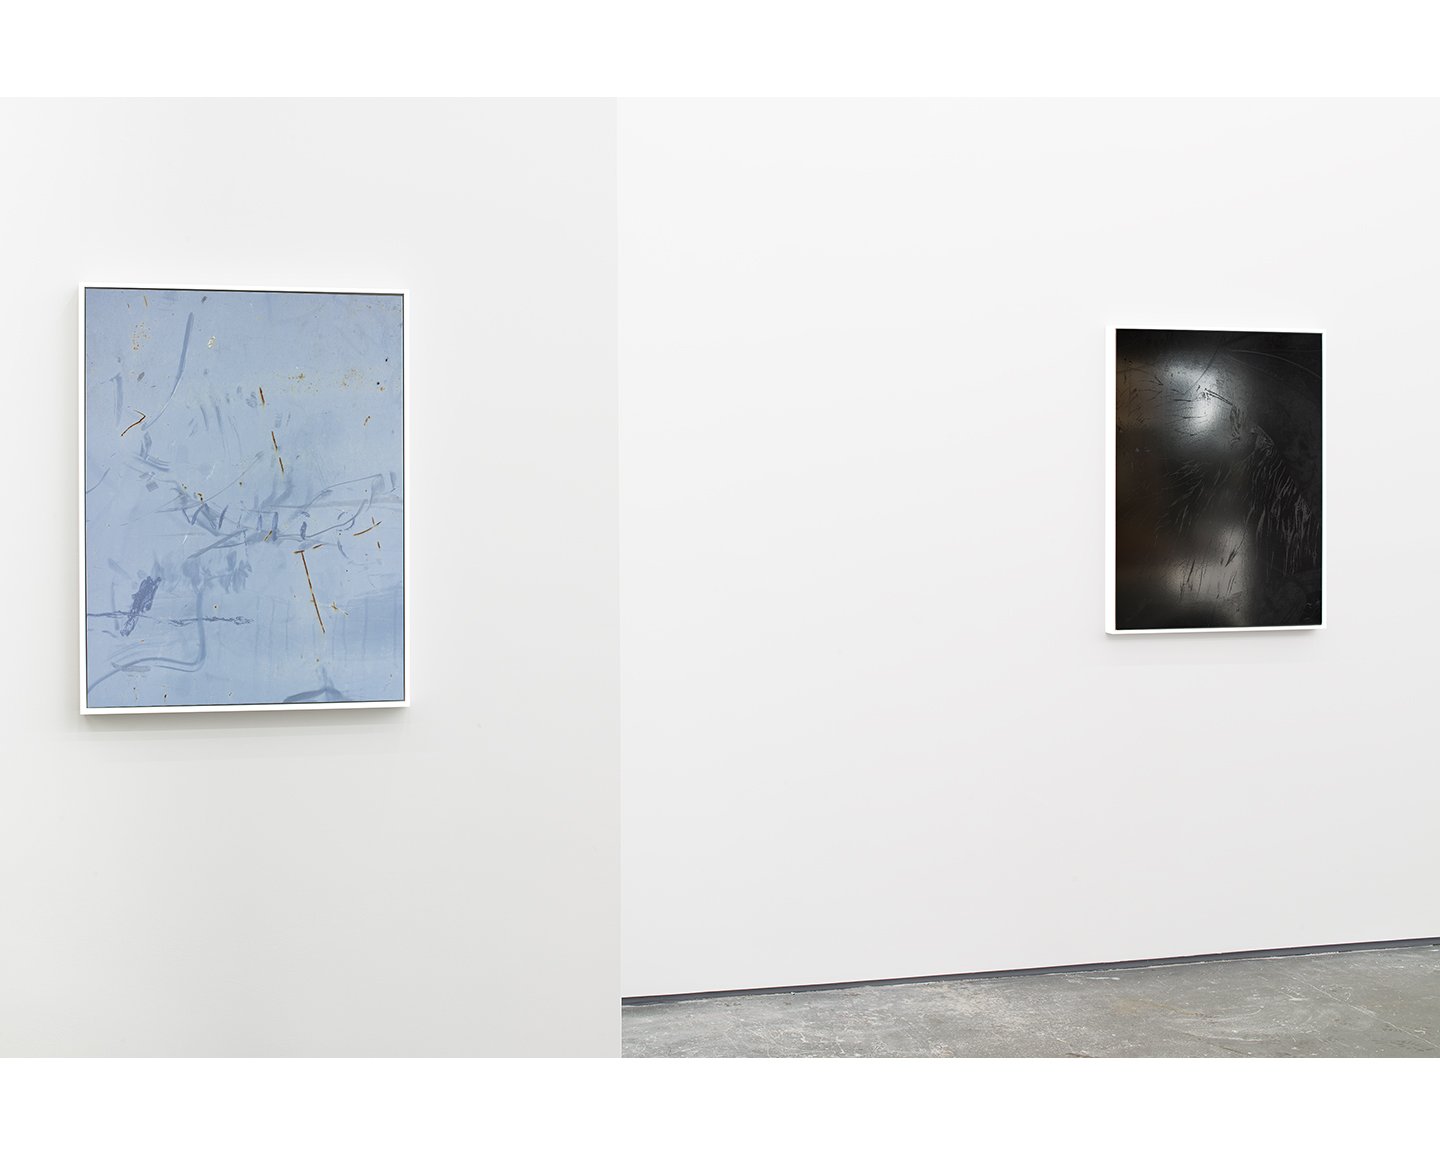  Installation View  if there was  Kate Werble Gallery, New York April - May 2015 